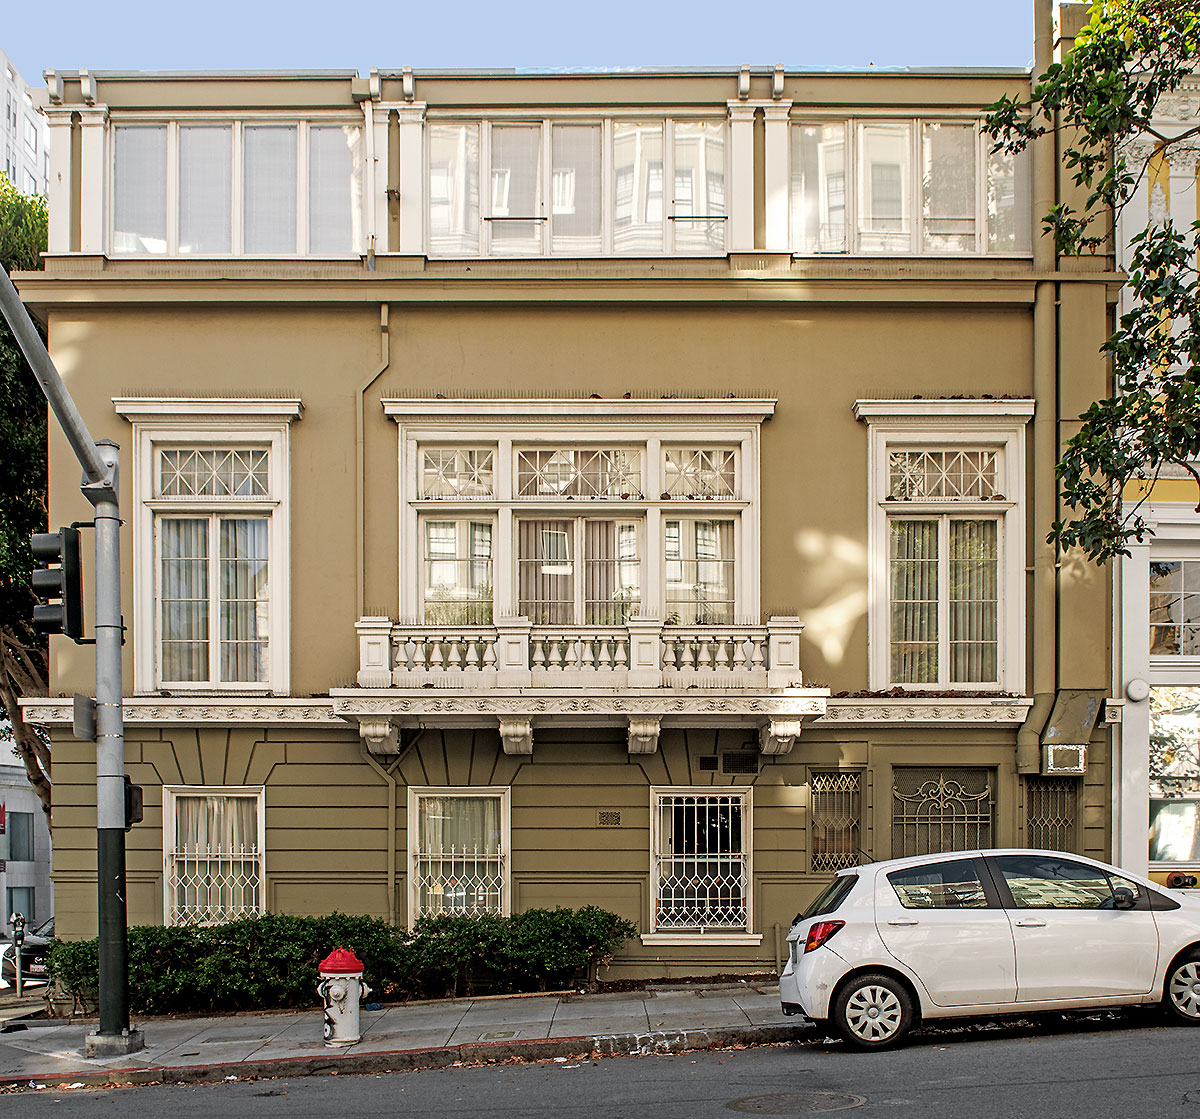 Century Club of California at 1355 Franklin Street in Pacific Heights, designed by Julia Morgan, built 1905